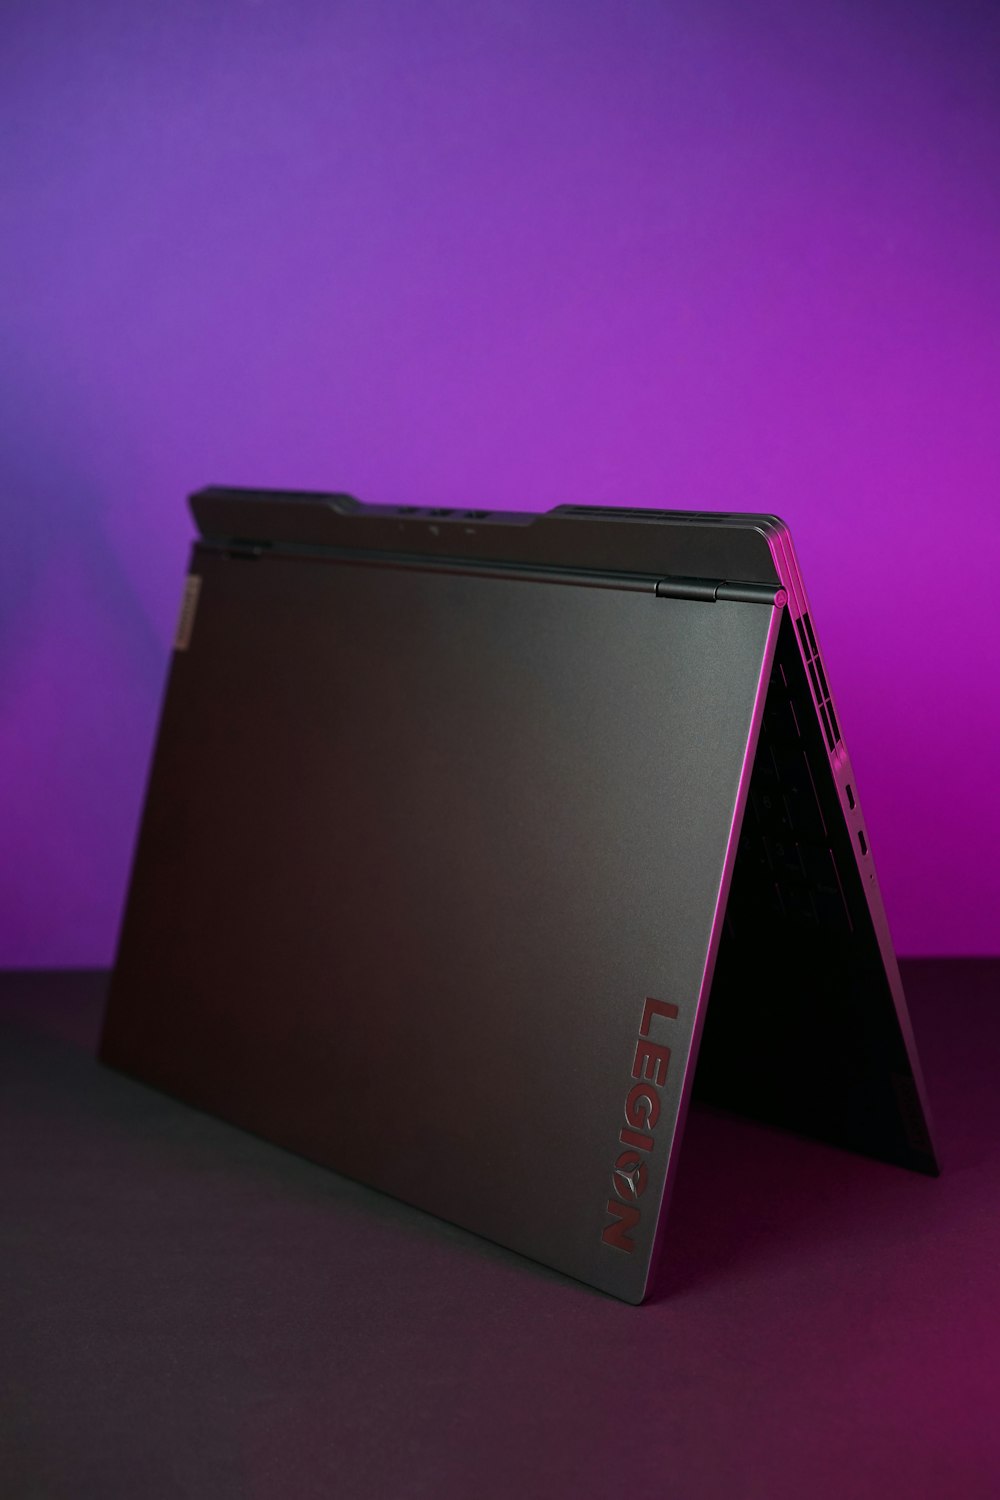 red and black lenovo laptop computer